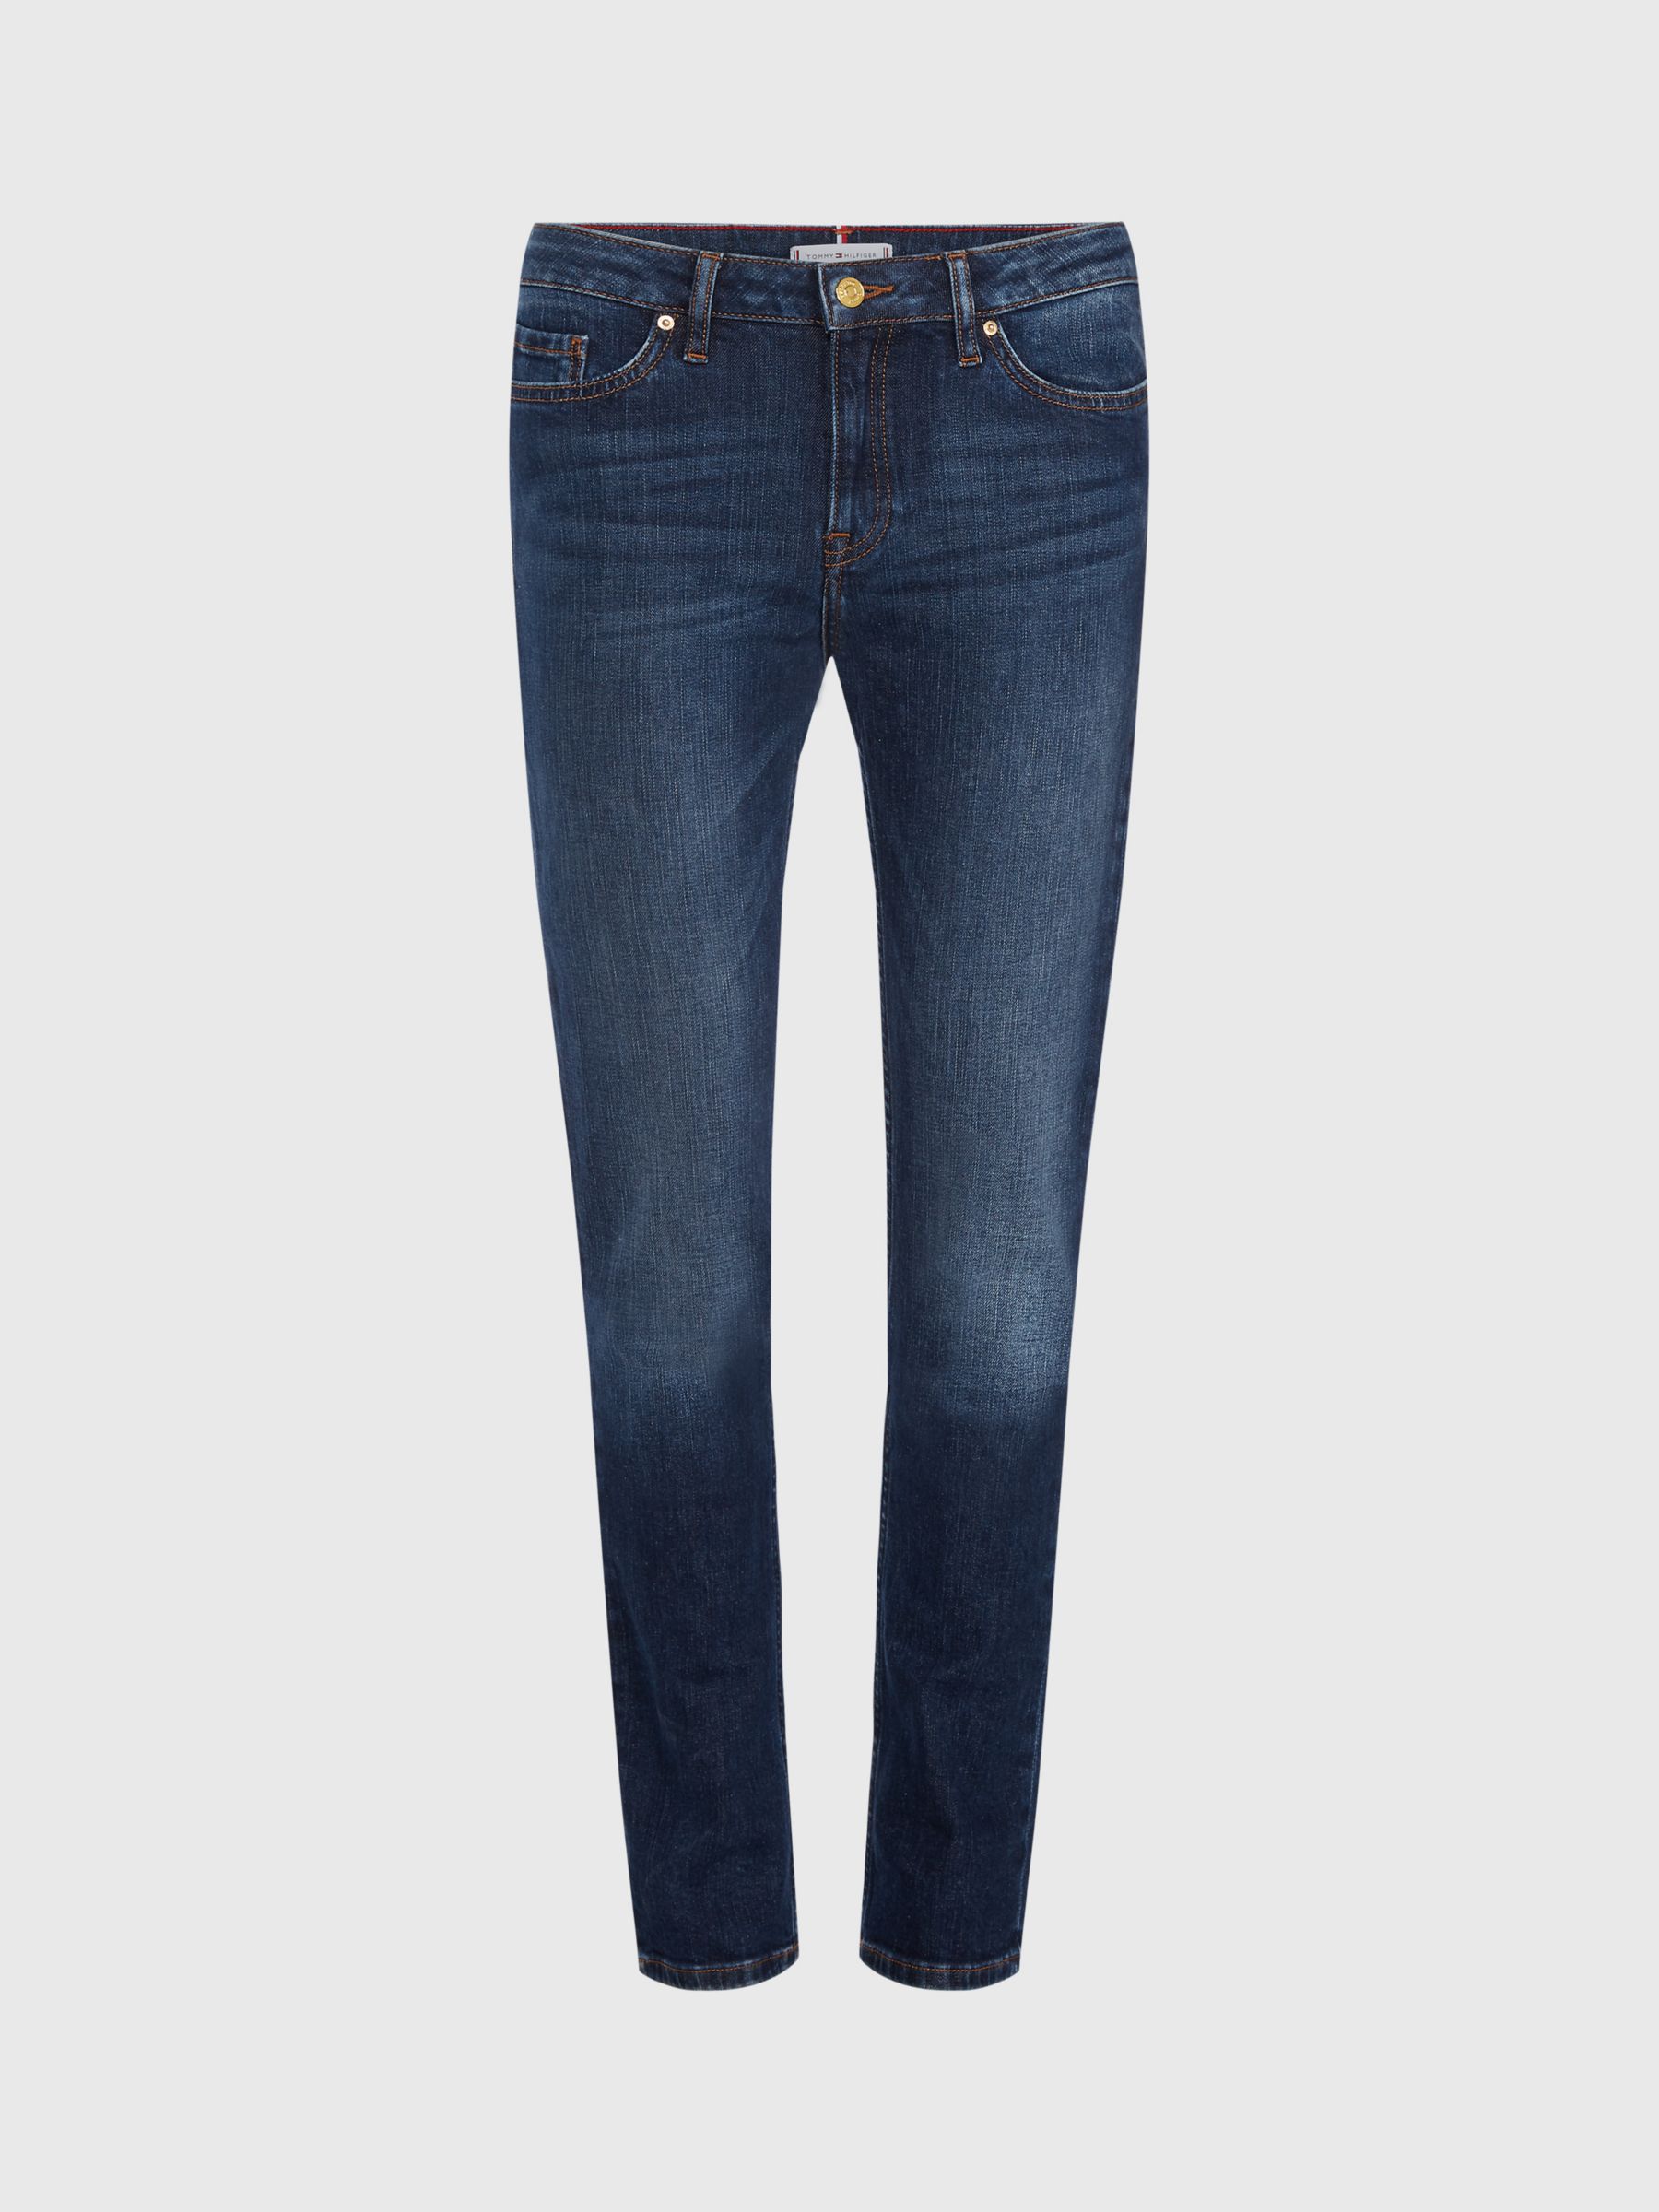 Tommy Hilfiger Straight Fit Jeans, Absolute Blue Wash at John Lewis ...